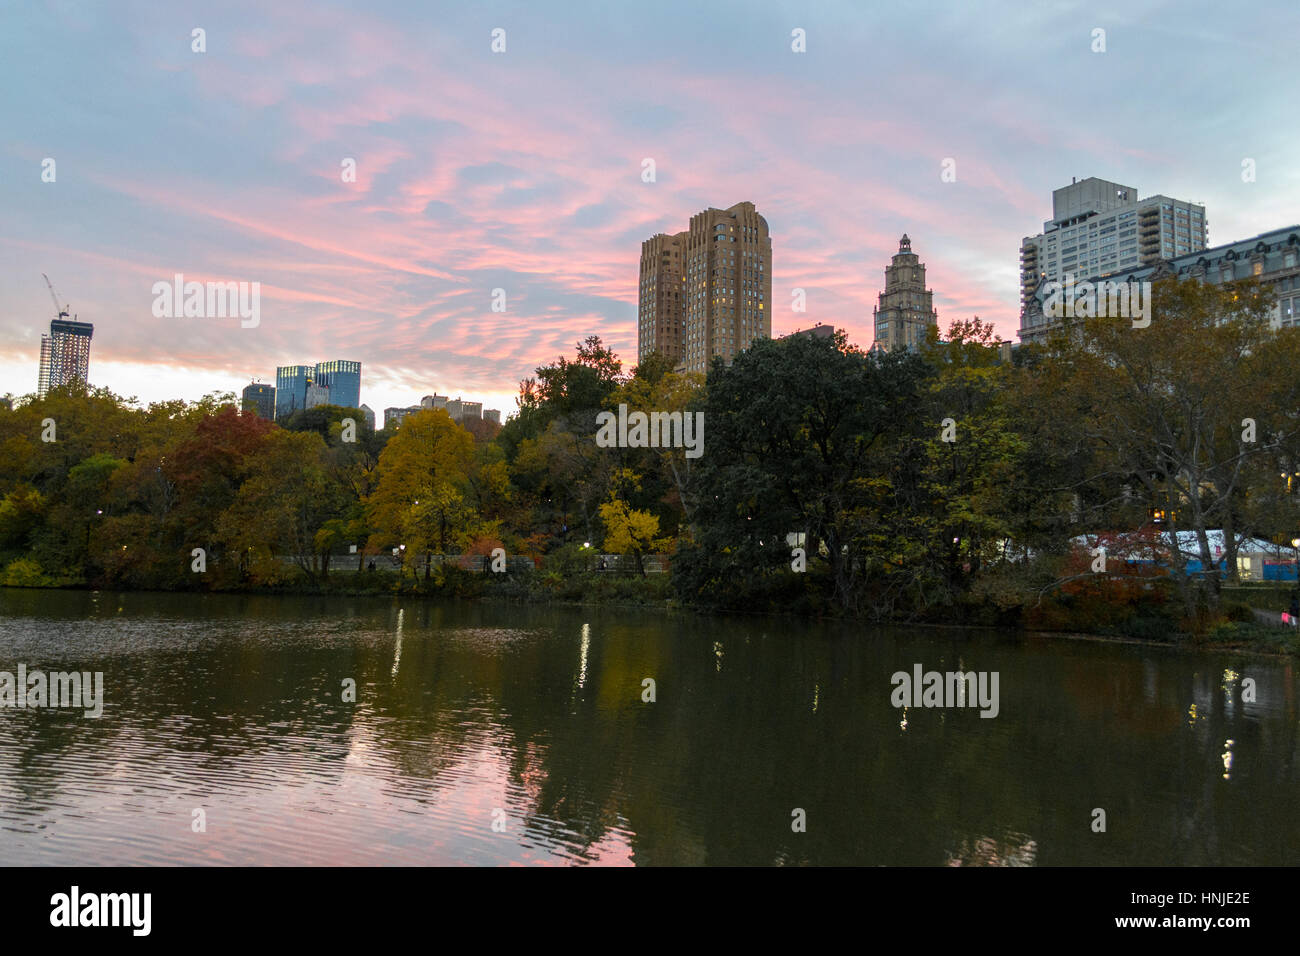 Central Park (NYC, USA) on a colorful fall evening Stock Photo